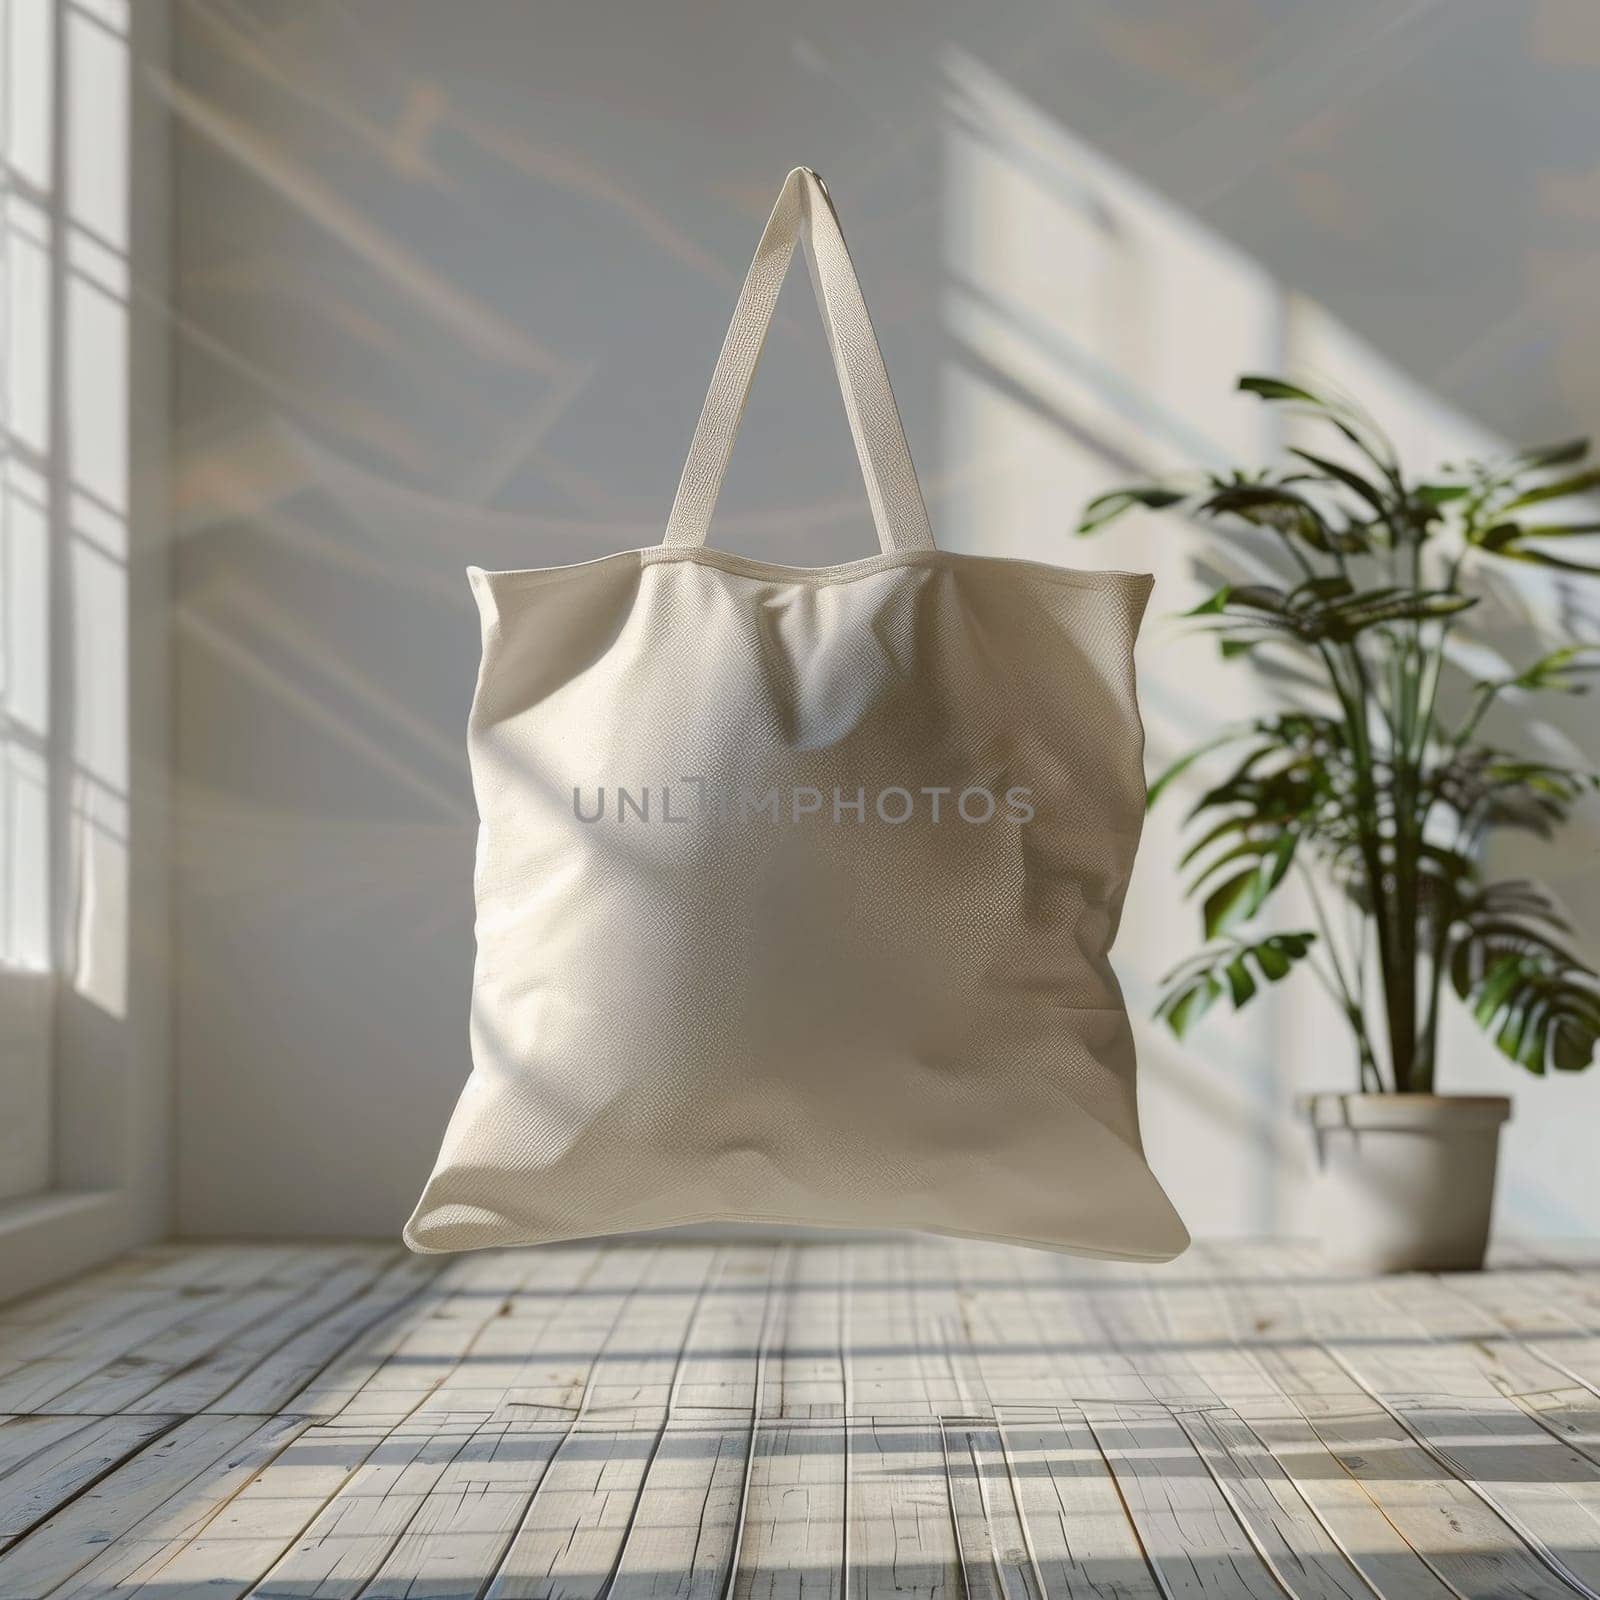 A white tote bag is hanging from a window sill. The bag is empty and the window is open, letting in a bright light. Concept of calm and serenity, as the bag hangs peacefully in the sunlight